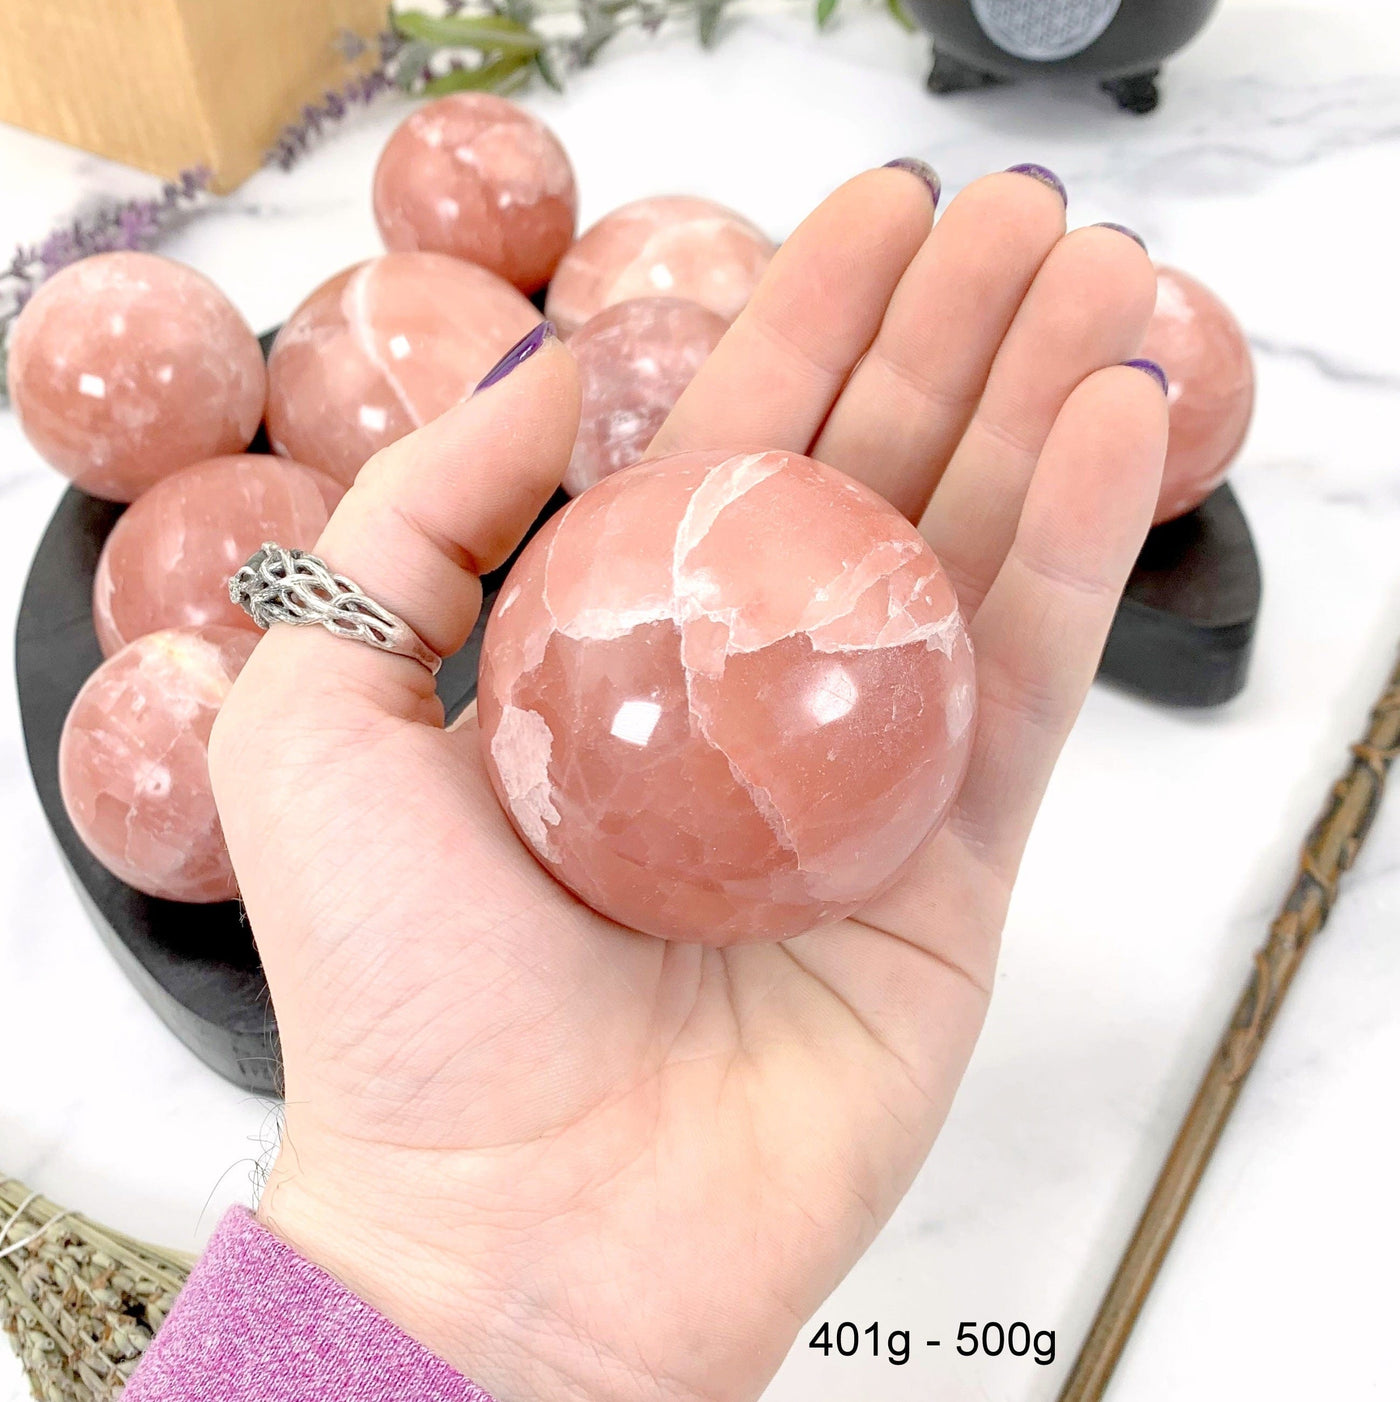 401gram - 500gram rose calcite sphere in hand with marble background